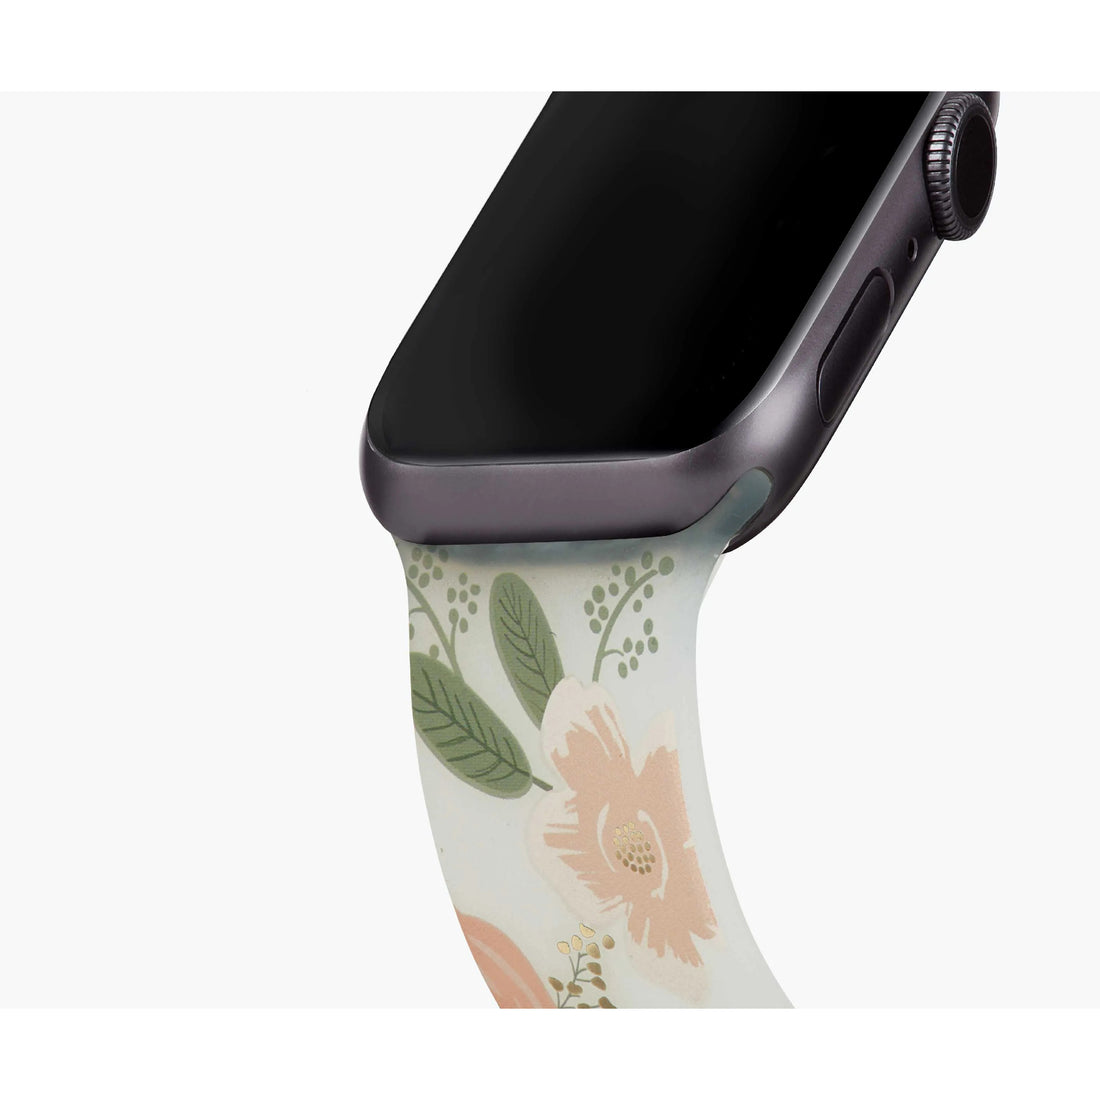 rifle-paper-co-apple-watch-38-40mm-wild-flowers-band- (4)